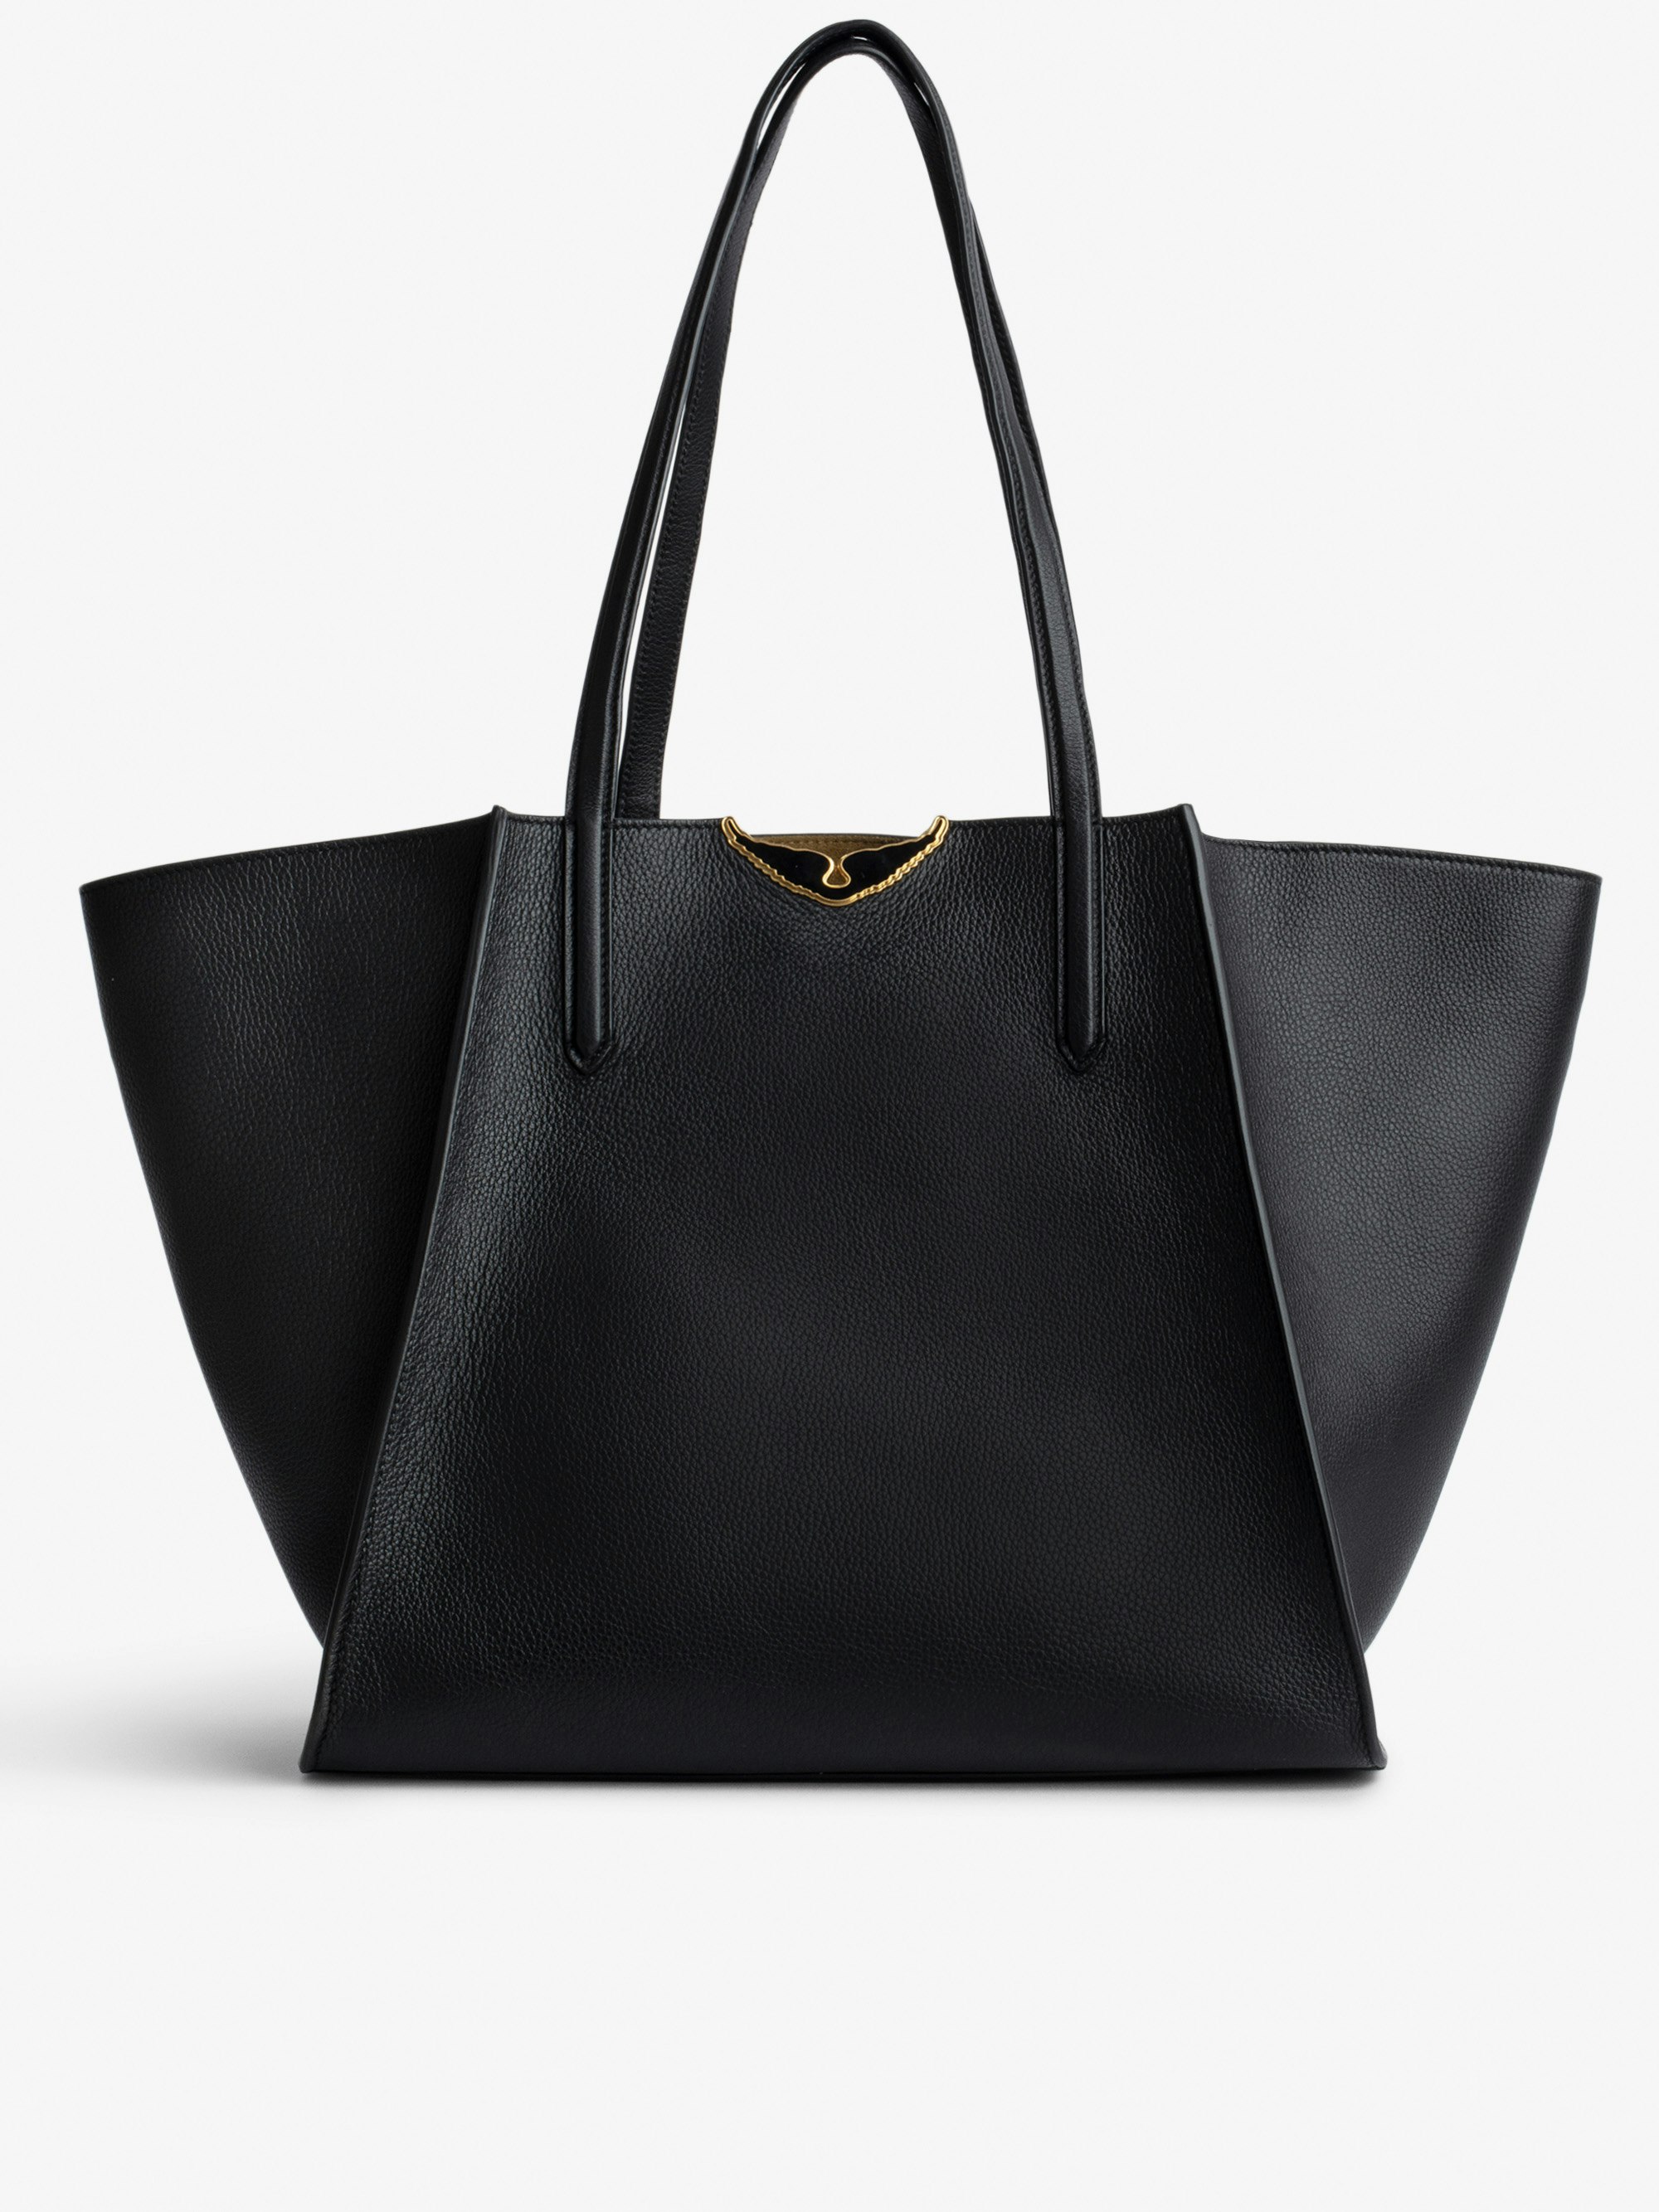 Le Borderline Bag - Women's tote bag in black grained leather and khaki suede with black lacquered wings